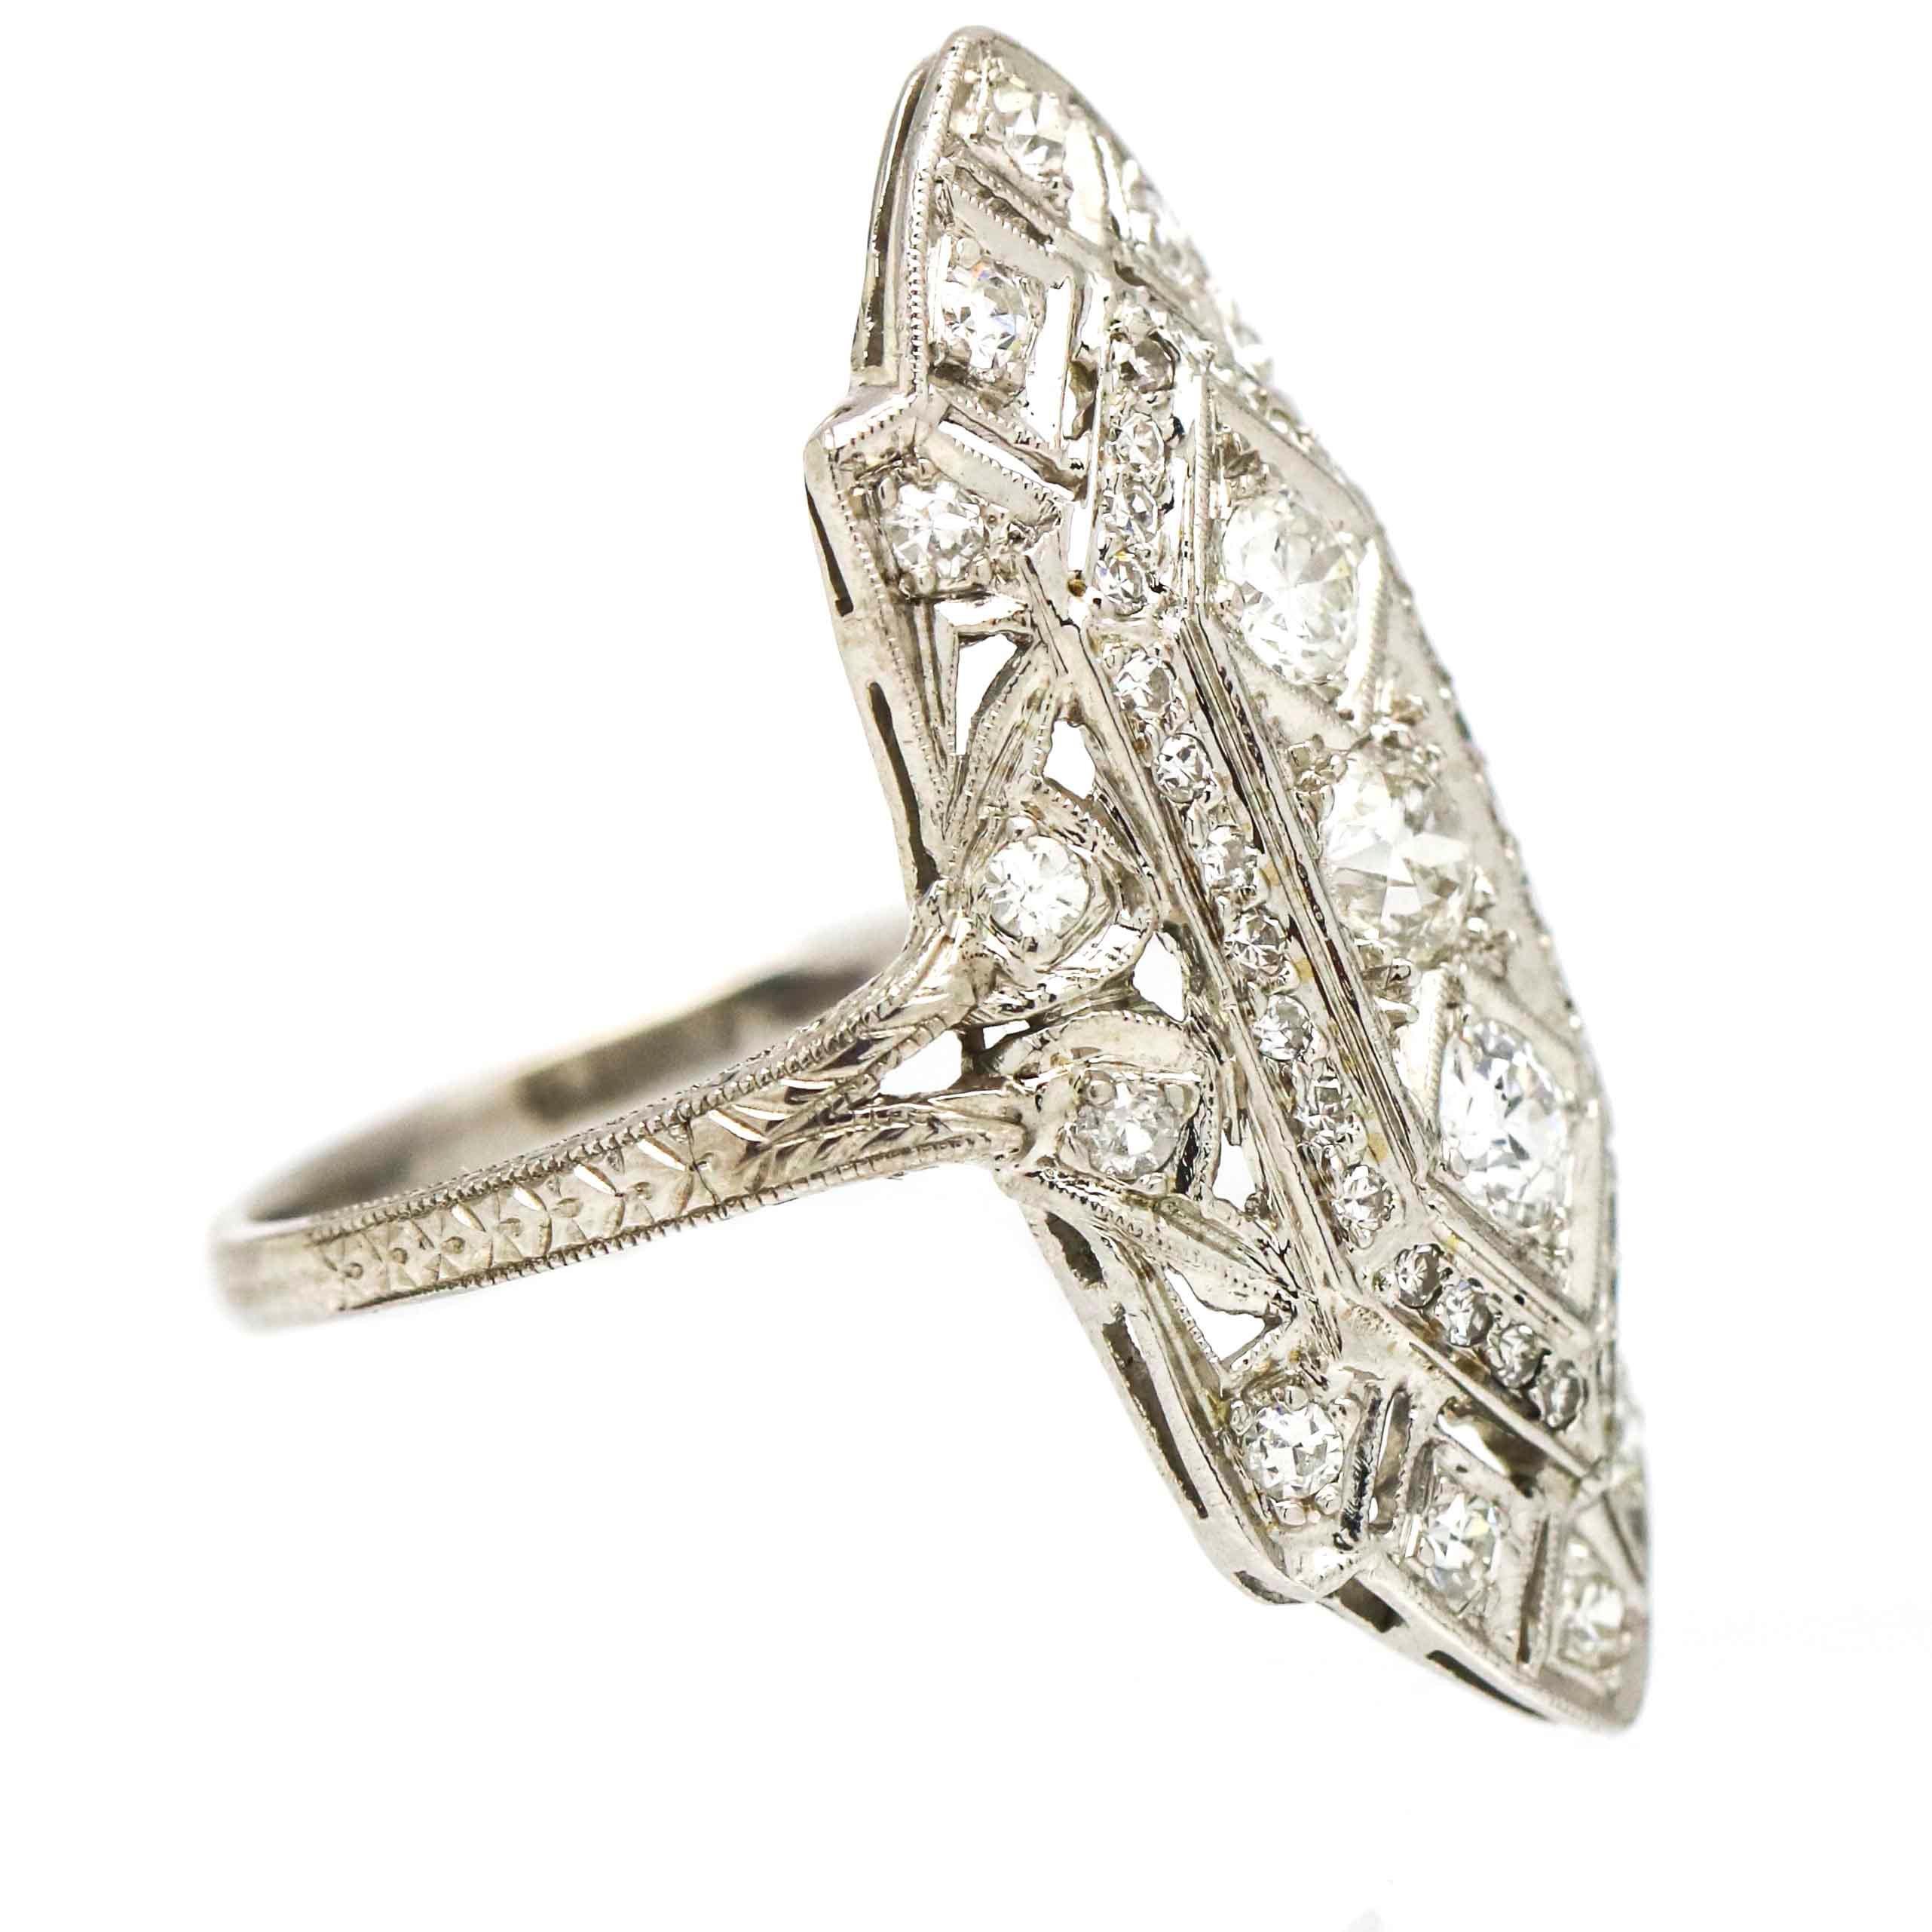 Vintage platinum cocktail ring crafted in platinum. The ring features 3 old european cut diamonds at center with prong set single cut diamonds throughout. Traditional filigree and openwork details on setting. VS-SI, H-I.